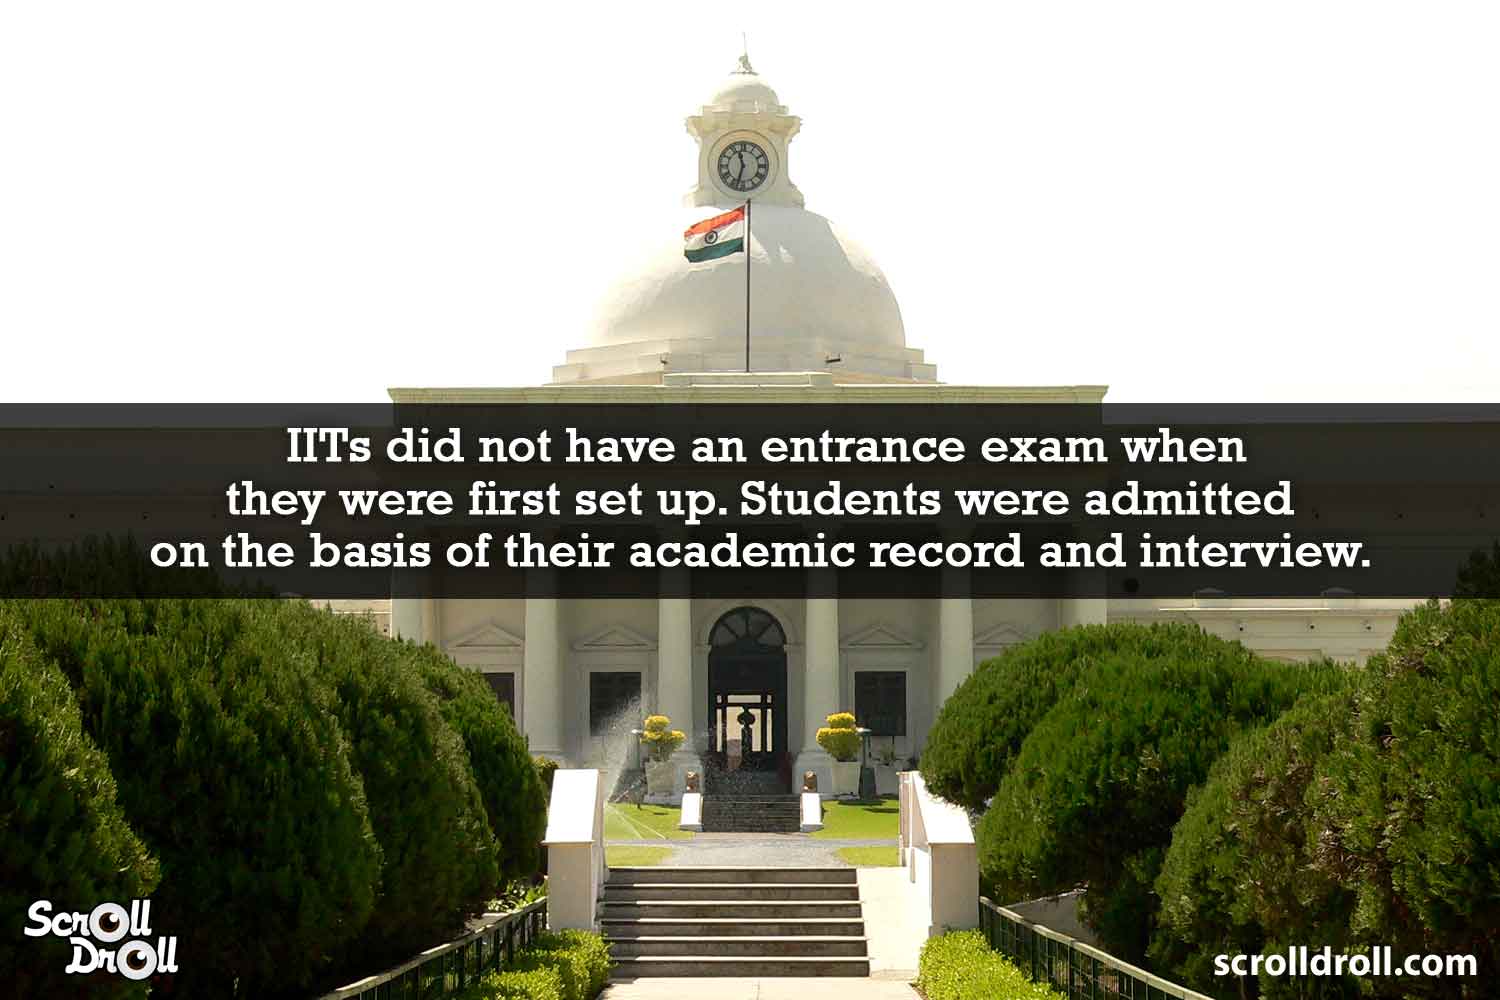 14 Interesting Facts About The IITs You Probably Did Not Know